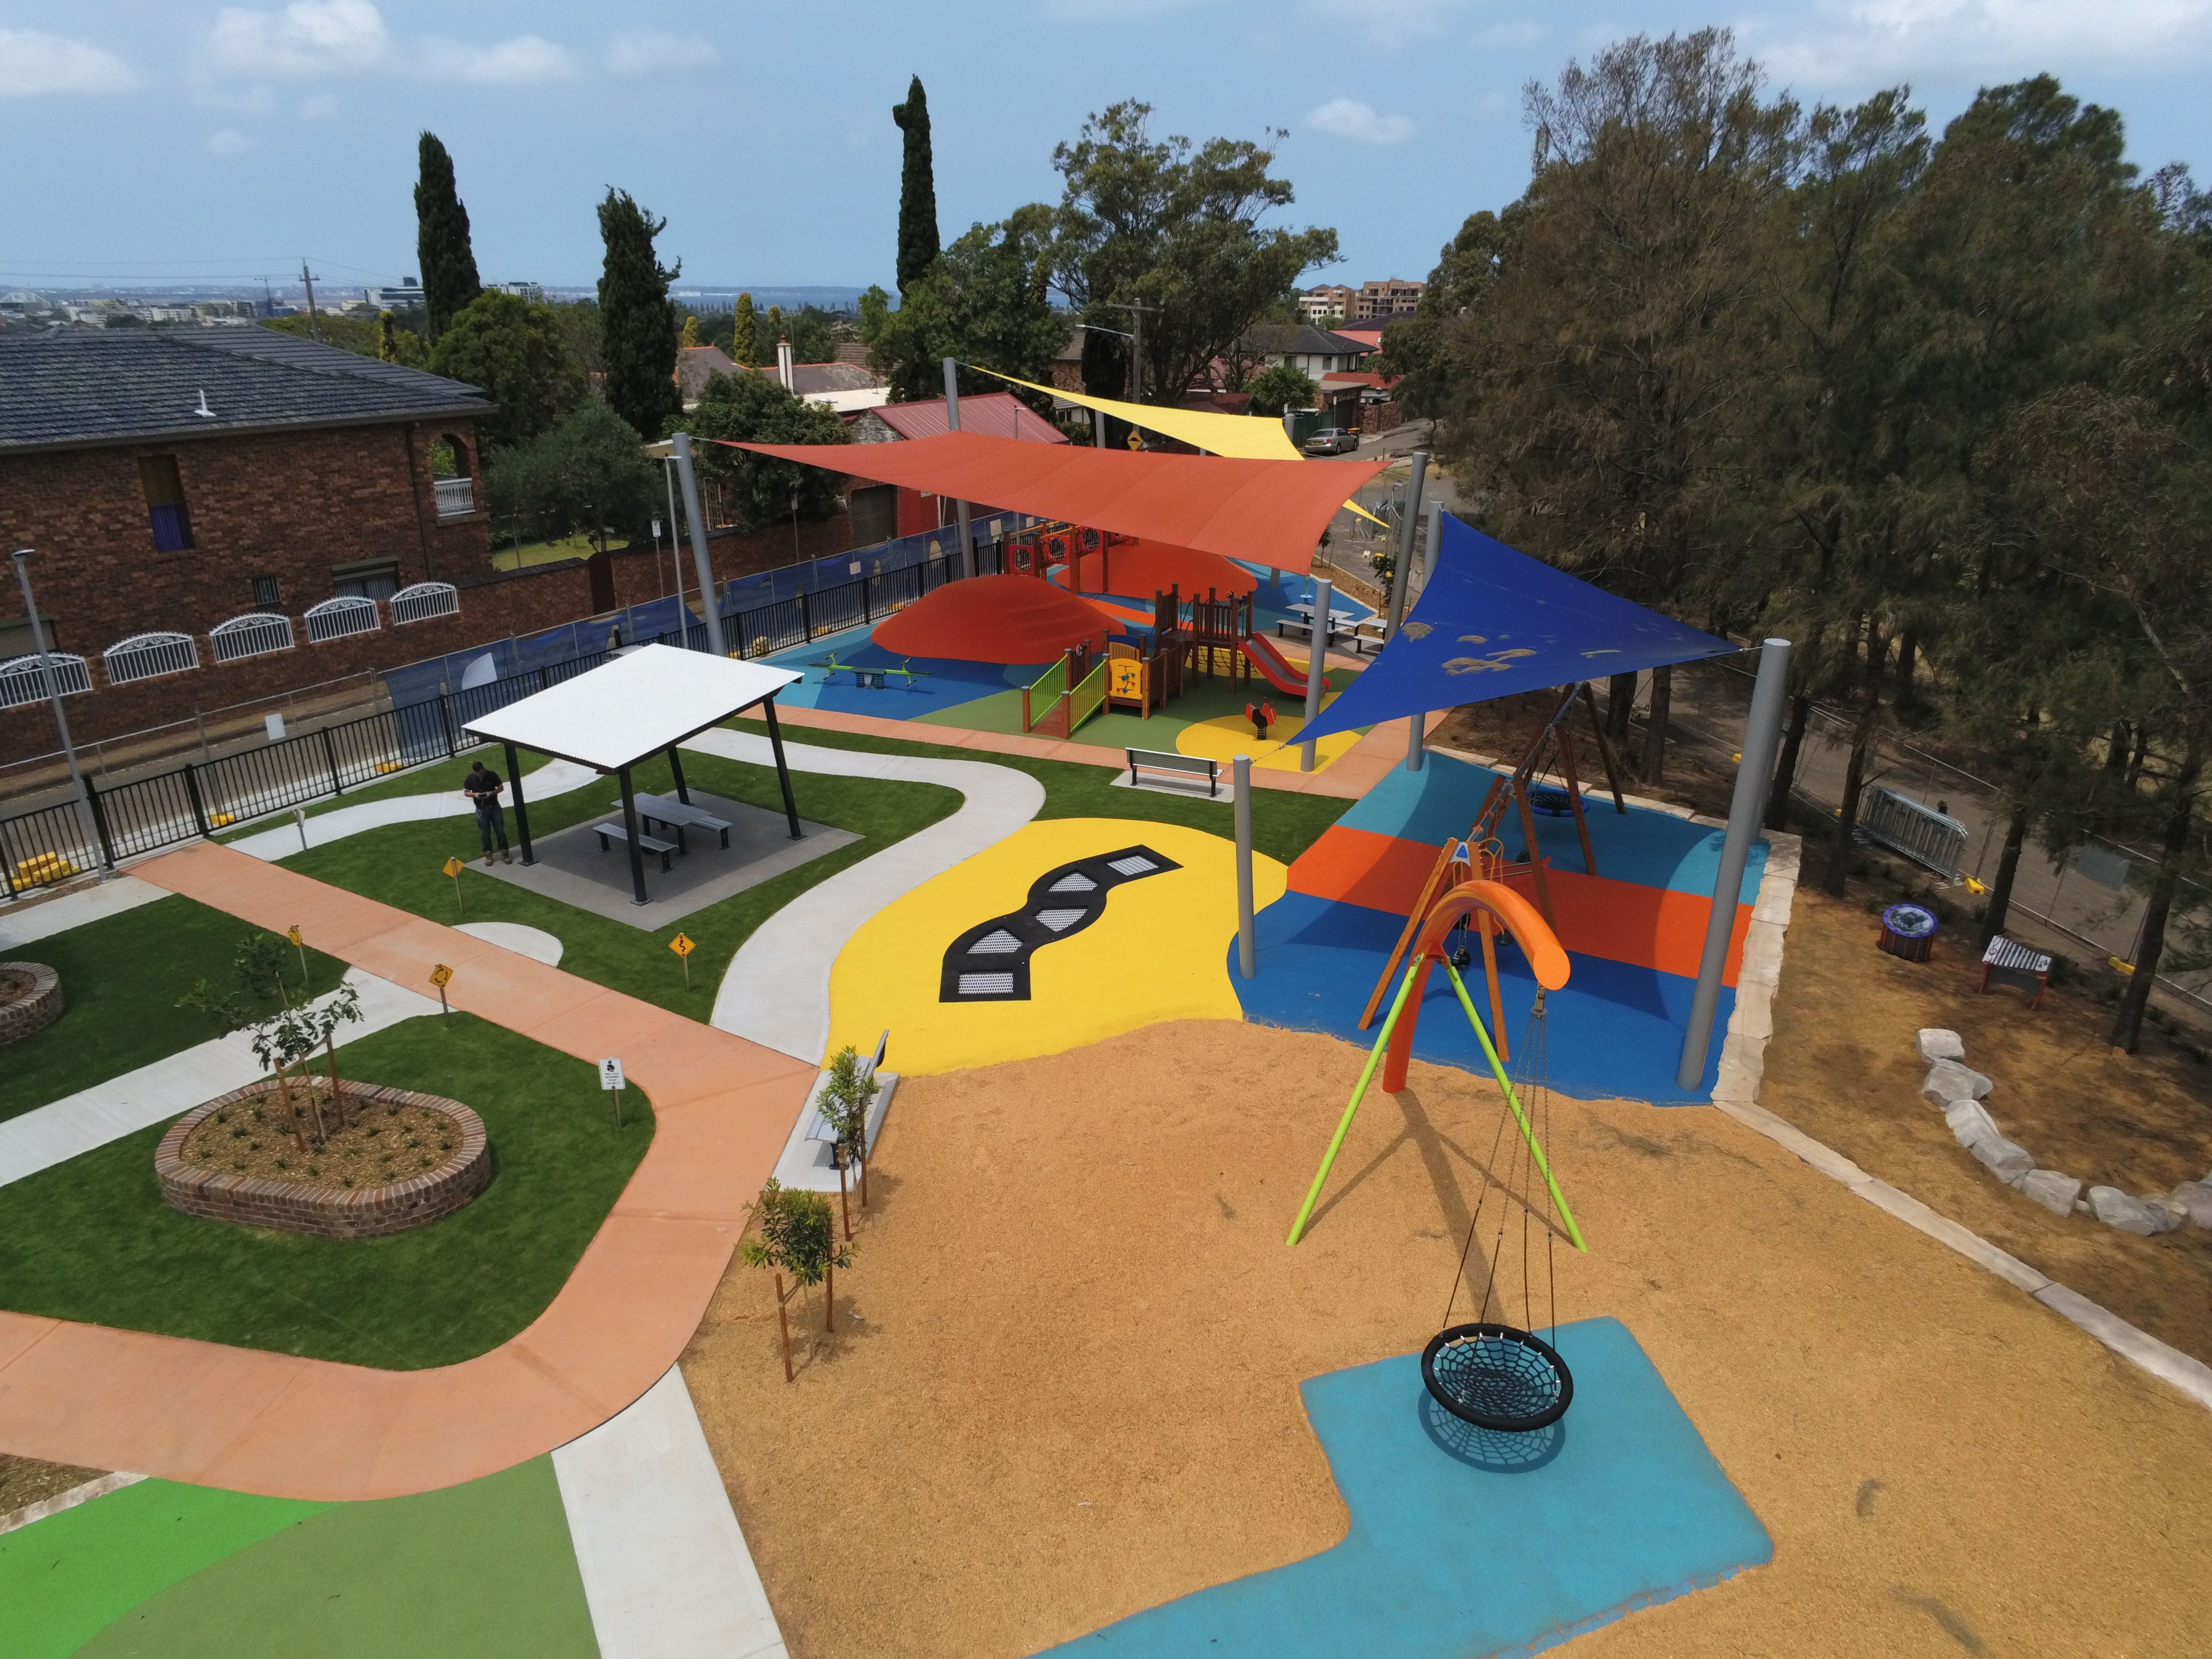 Australian Sports & Safety Surfaces - Inclusive Adventure Playground and Bike Training Circuit at Kempt Field Image -5df978f181df0